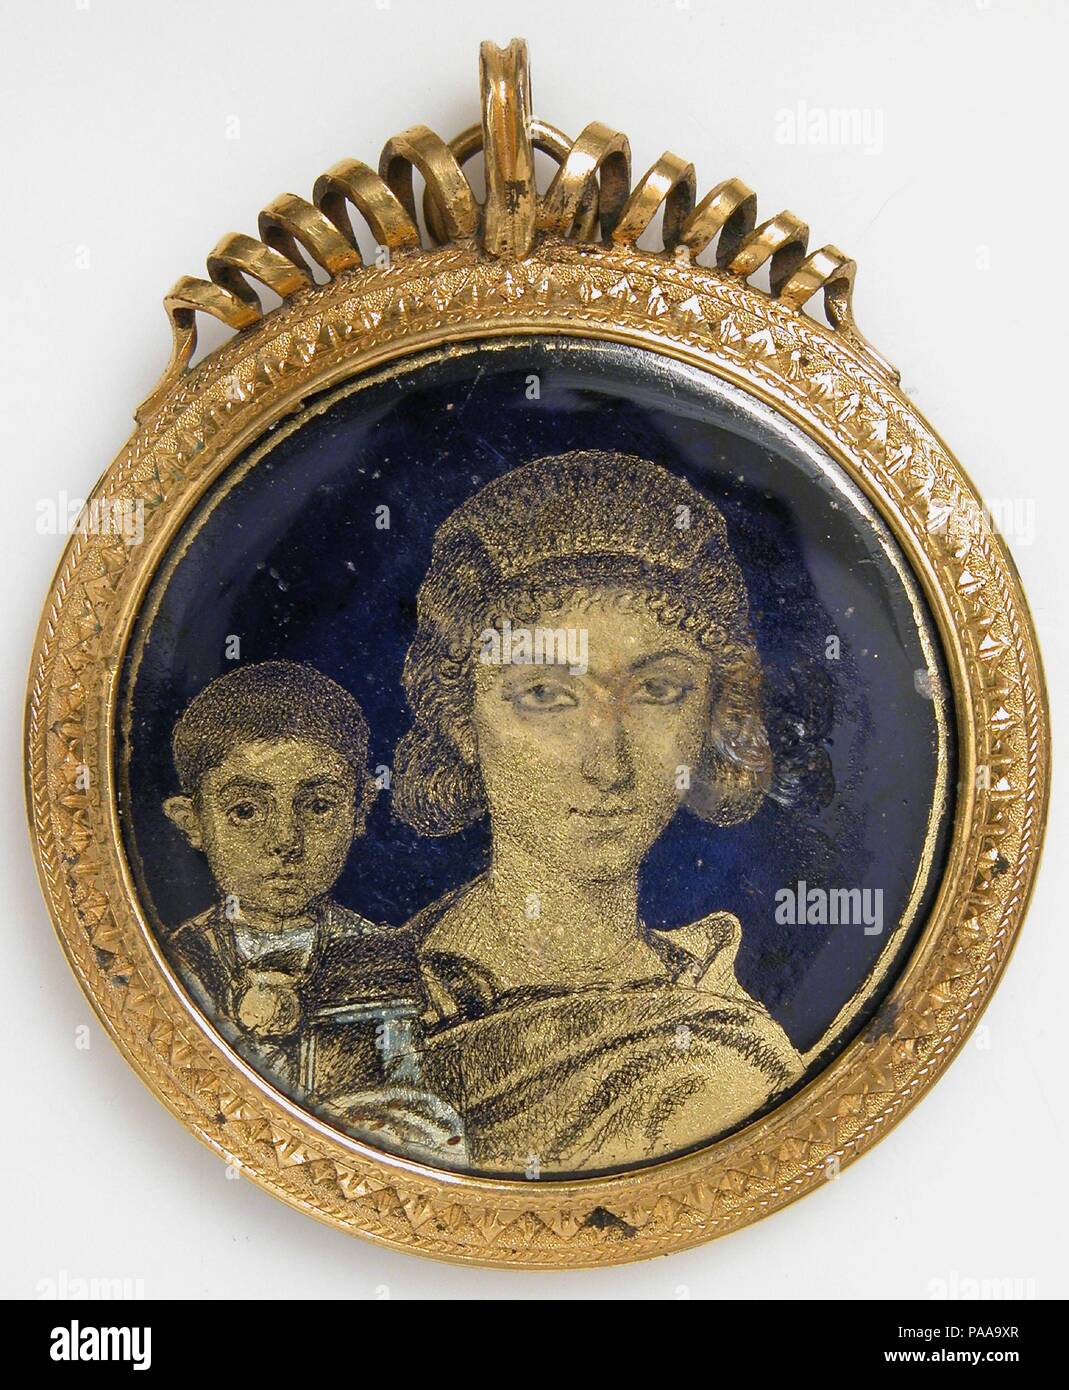 Gold Glass Medallion with a Mother and Child. Culture: Roman. Dimensions: Overall: 1 7/8 x 3/16 in. (4.8 x 0.5 cm). Date: early 4th century.  The mother, a fashionably coiffed matron, is shown with her son. He wears a large gold pectoral, or neck ring. Medallions like this one, meant to be worn as jewelry, are closely associated with Alexandria. Museum: Metropolitan Museum of Art, New York, USA. Stock Photo